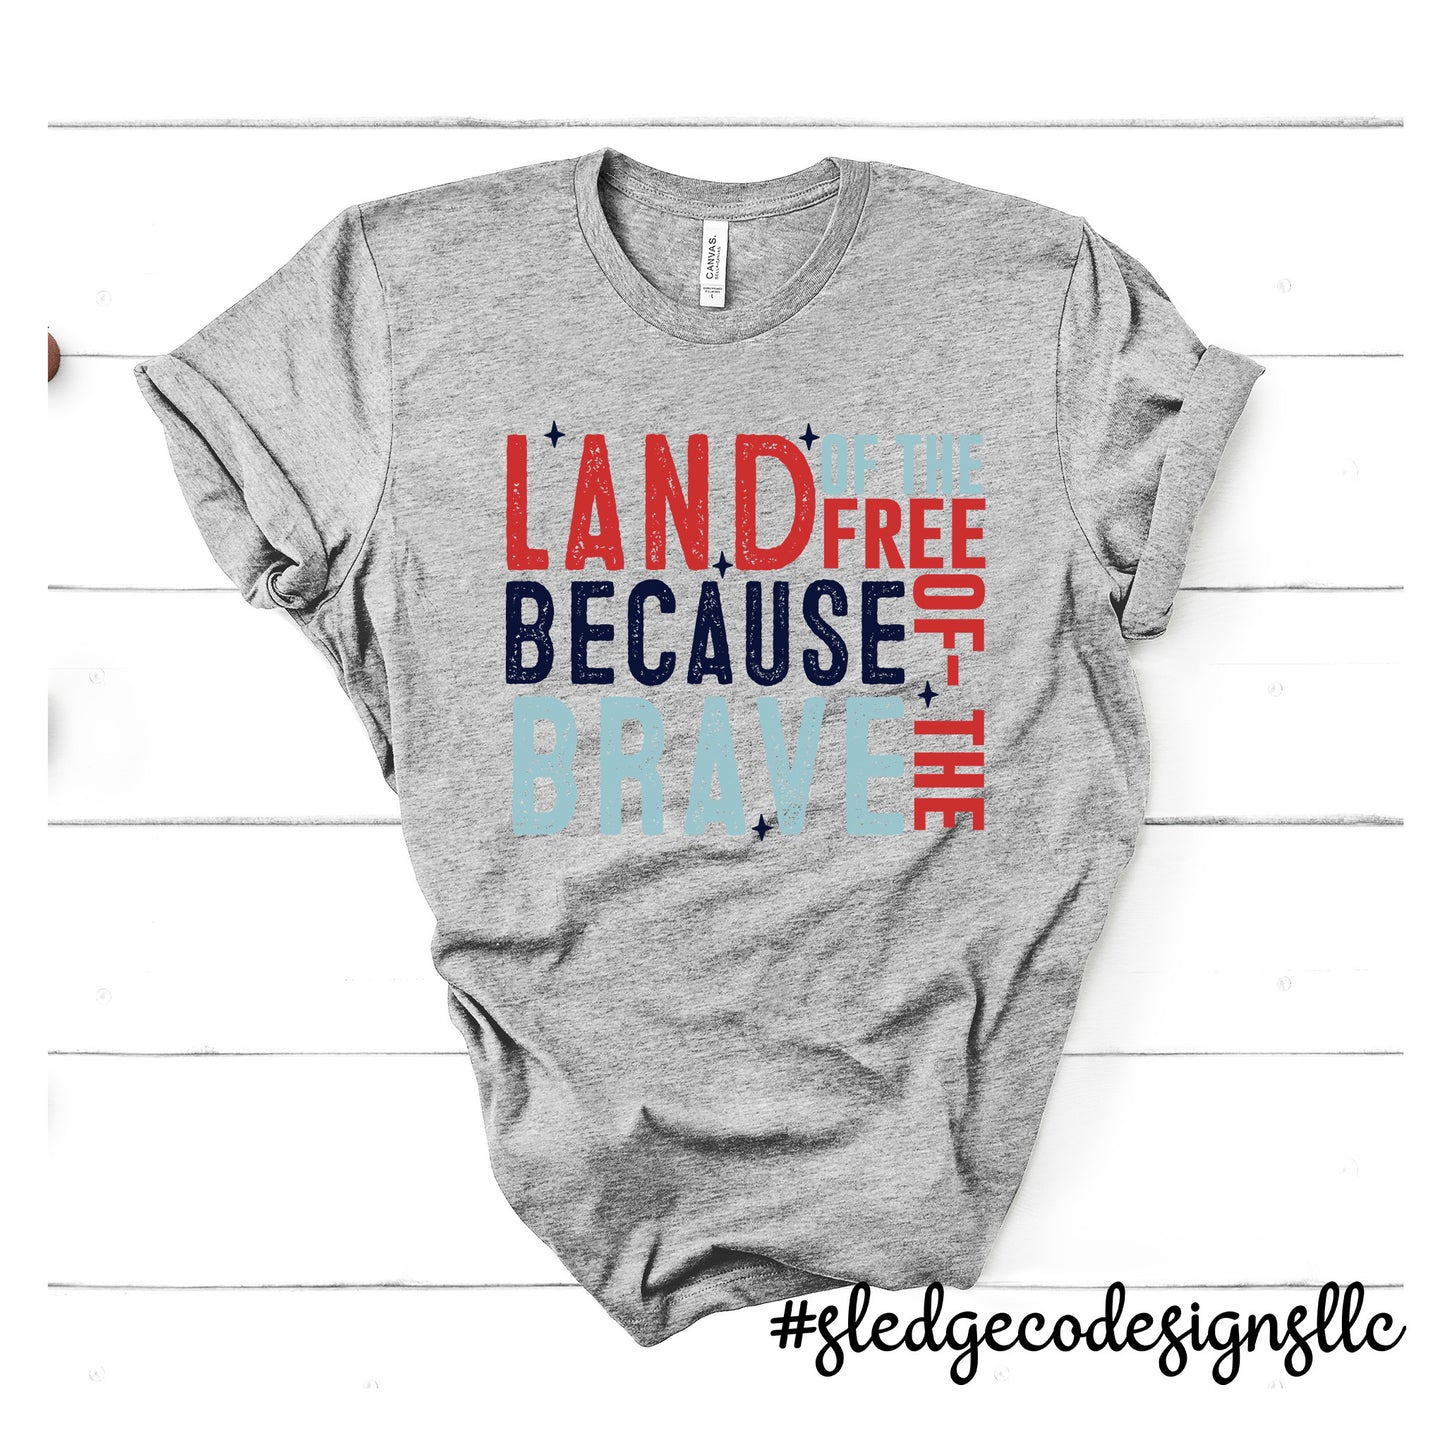 LAND OF THE FREE BECAUSE OF THE BAVE | Patriot | July 4th | Custom Unisex TSHIRT